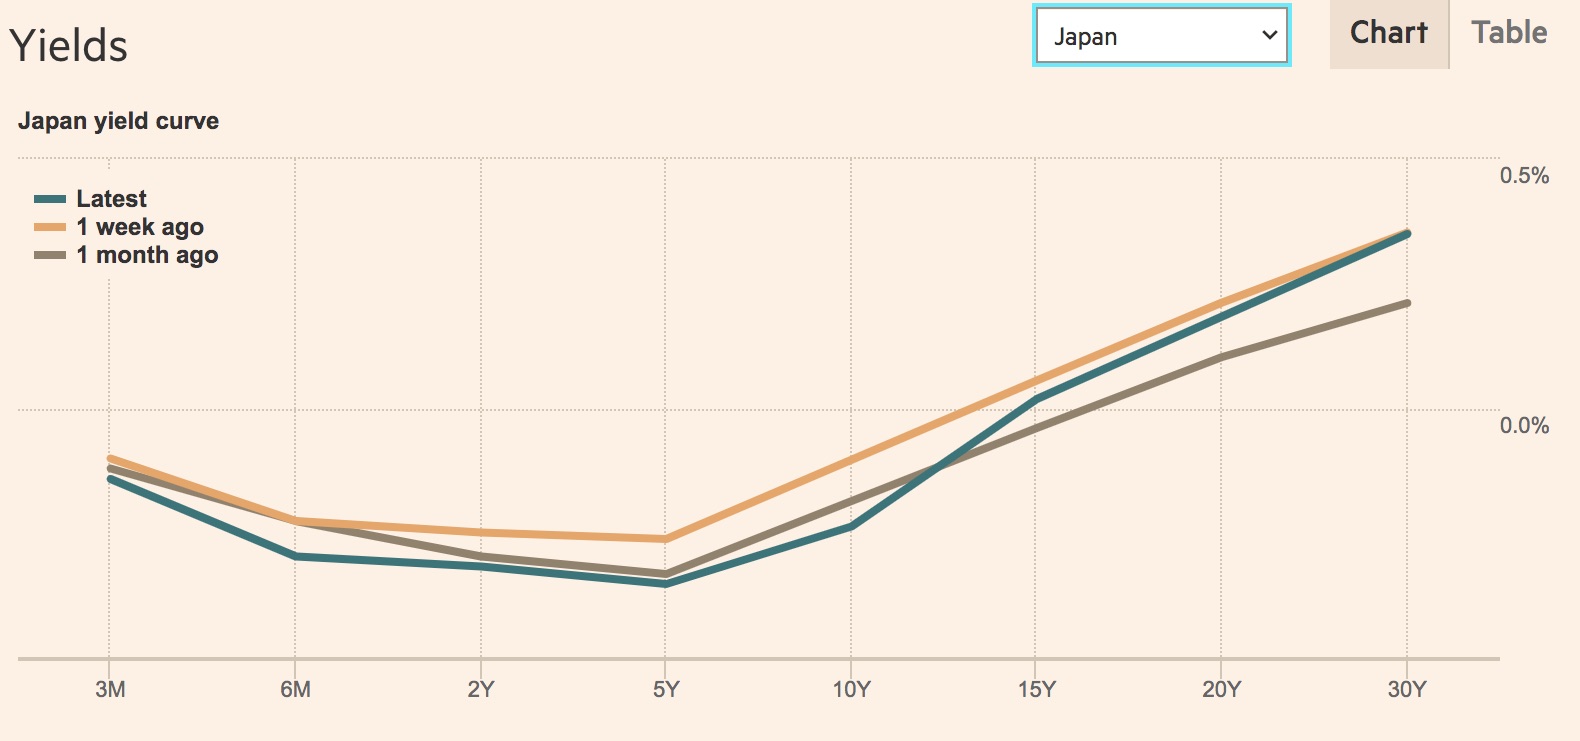 Japan yield curve shows 5y in negative interest